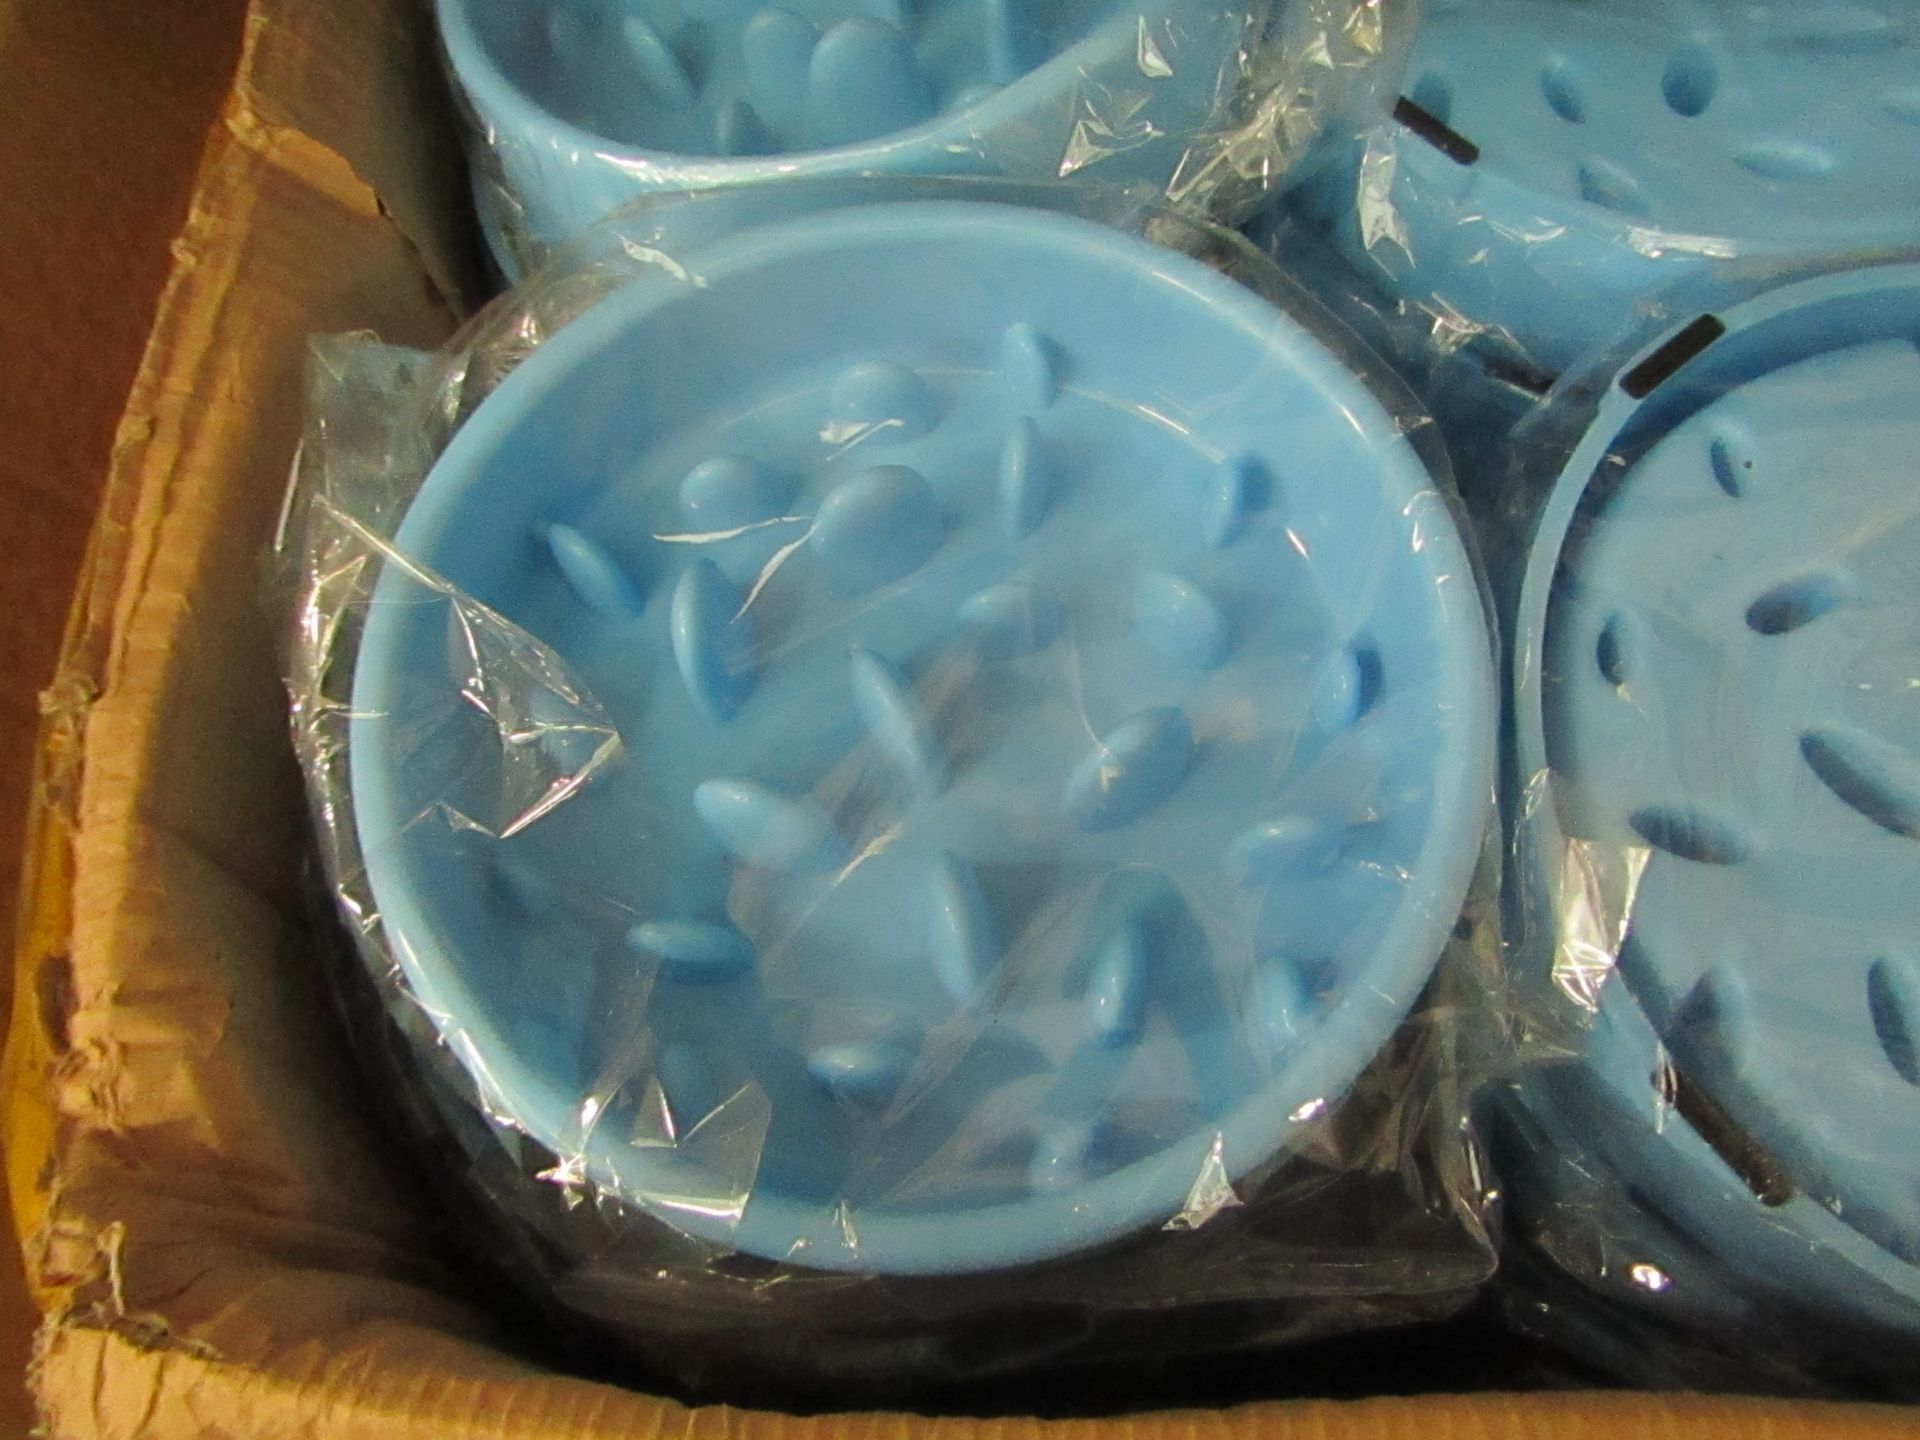 10 x Slow Feed Dog Bowls. New & Packaged. RRP £6.99 Each - Image 2 of 2